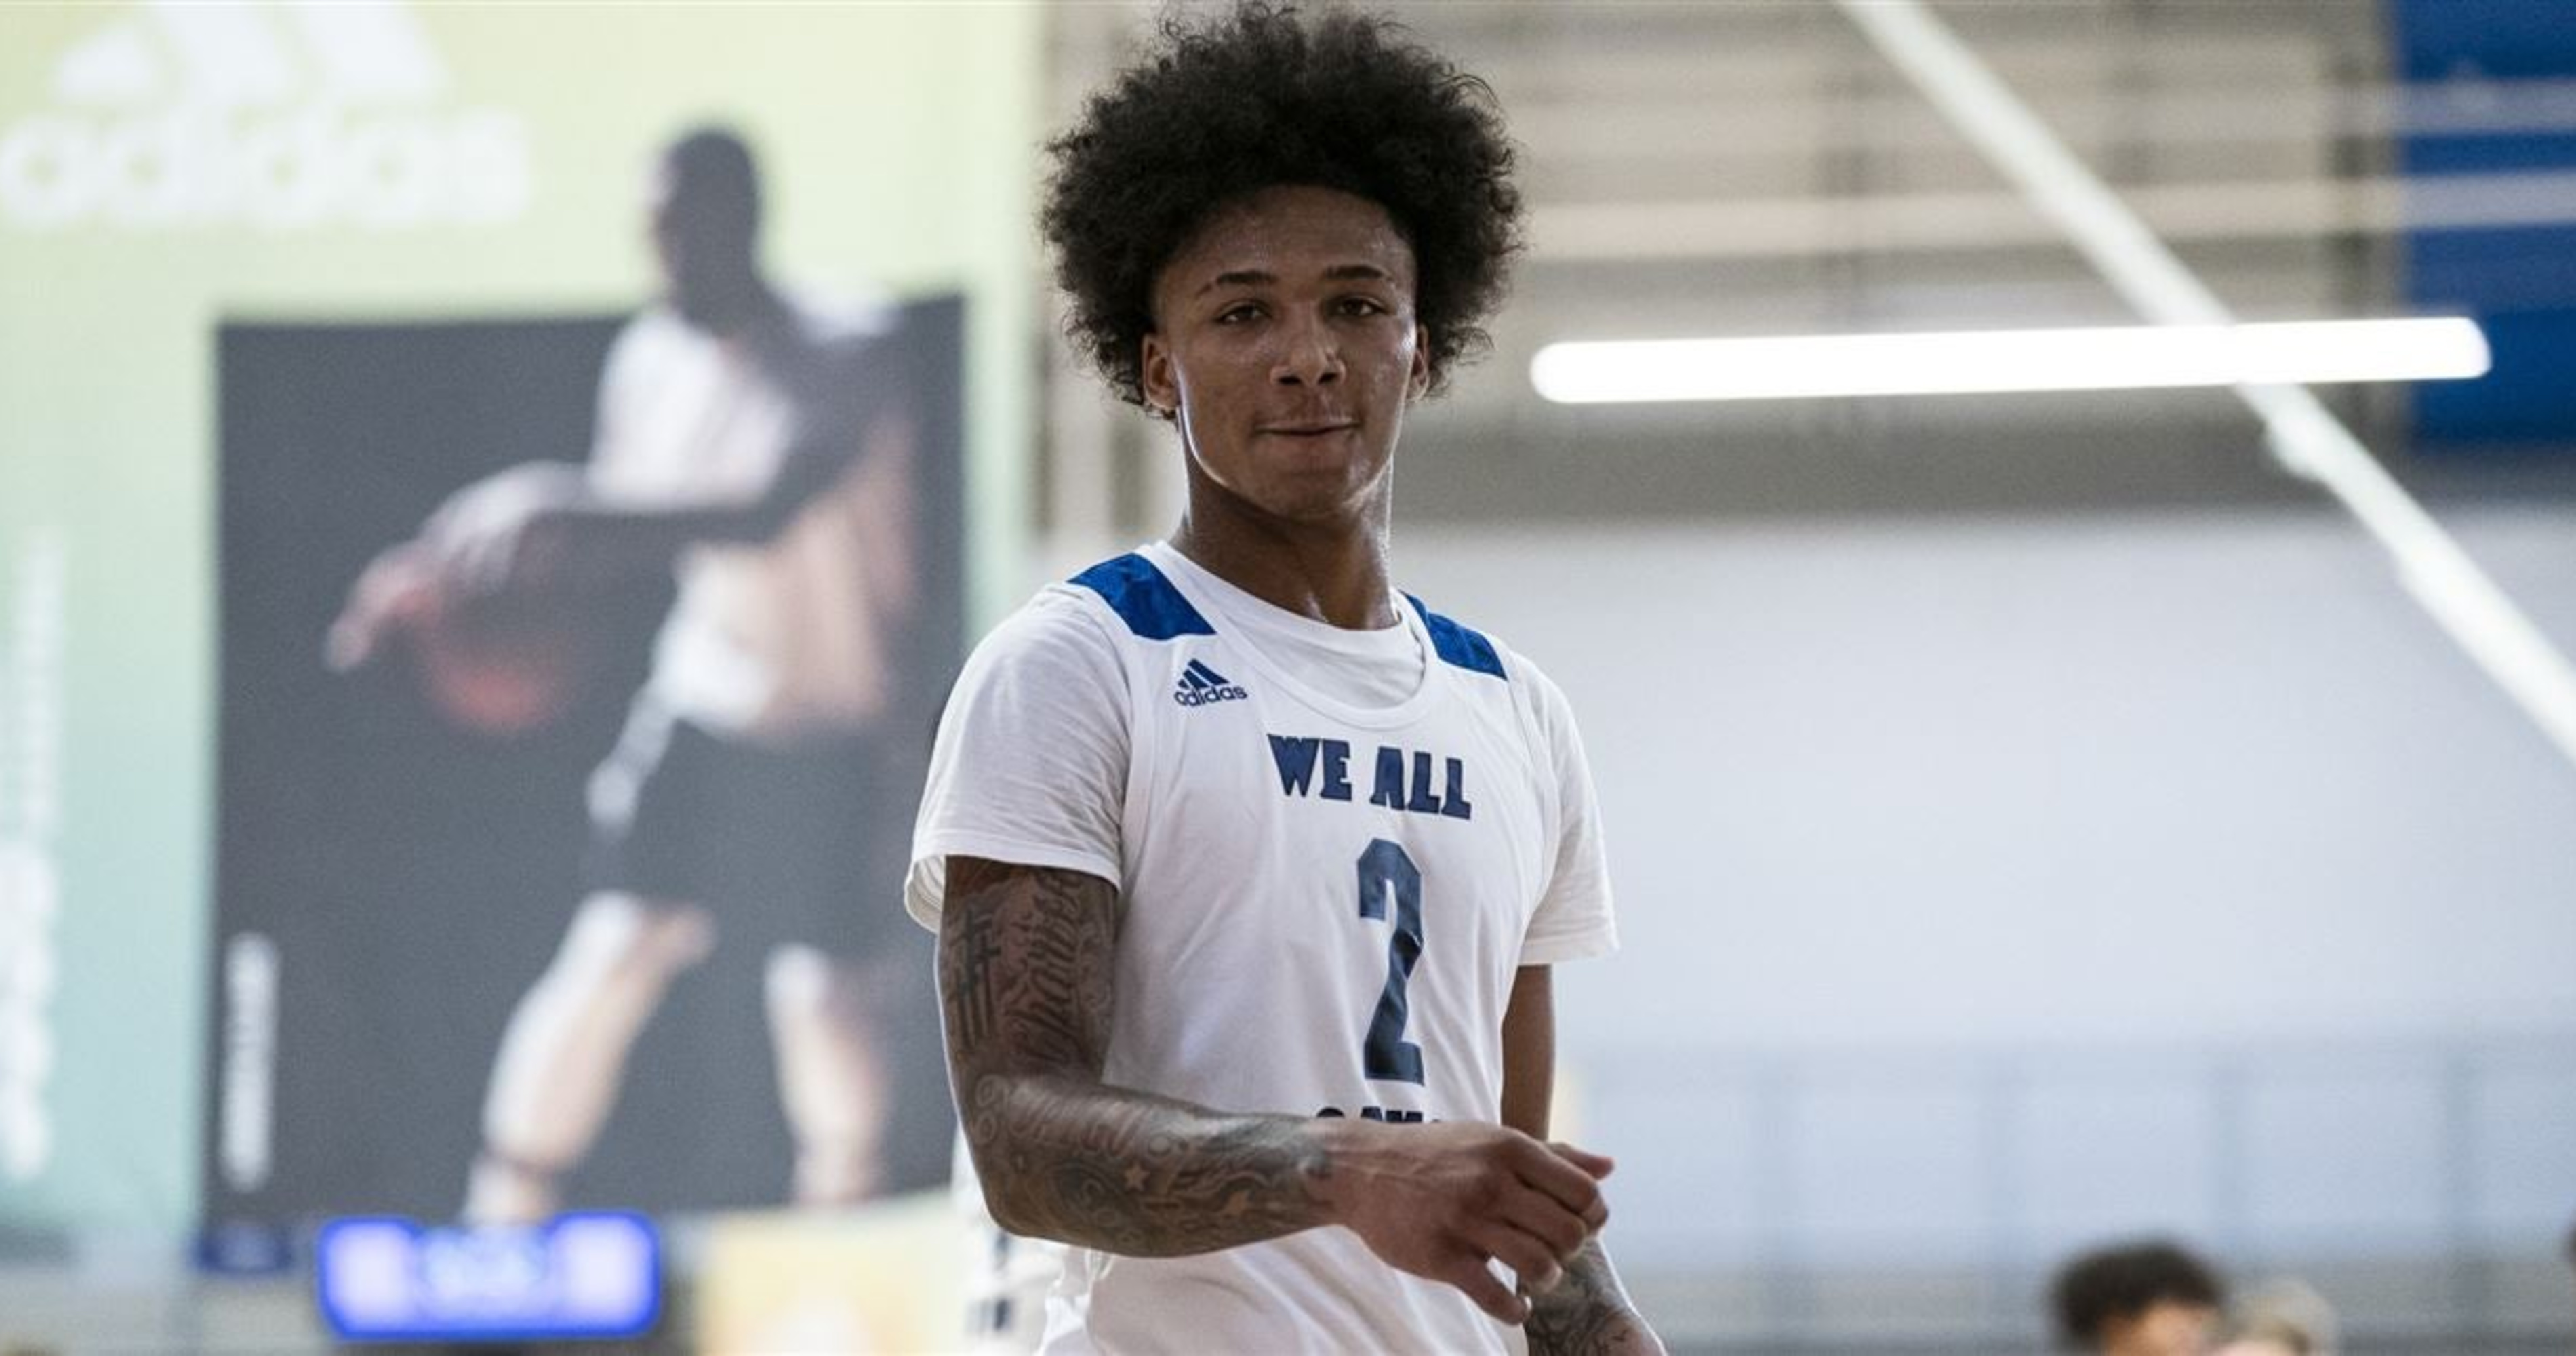 4-Star Guard Prospect Mikey Williams Commits to Memphis over G League